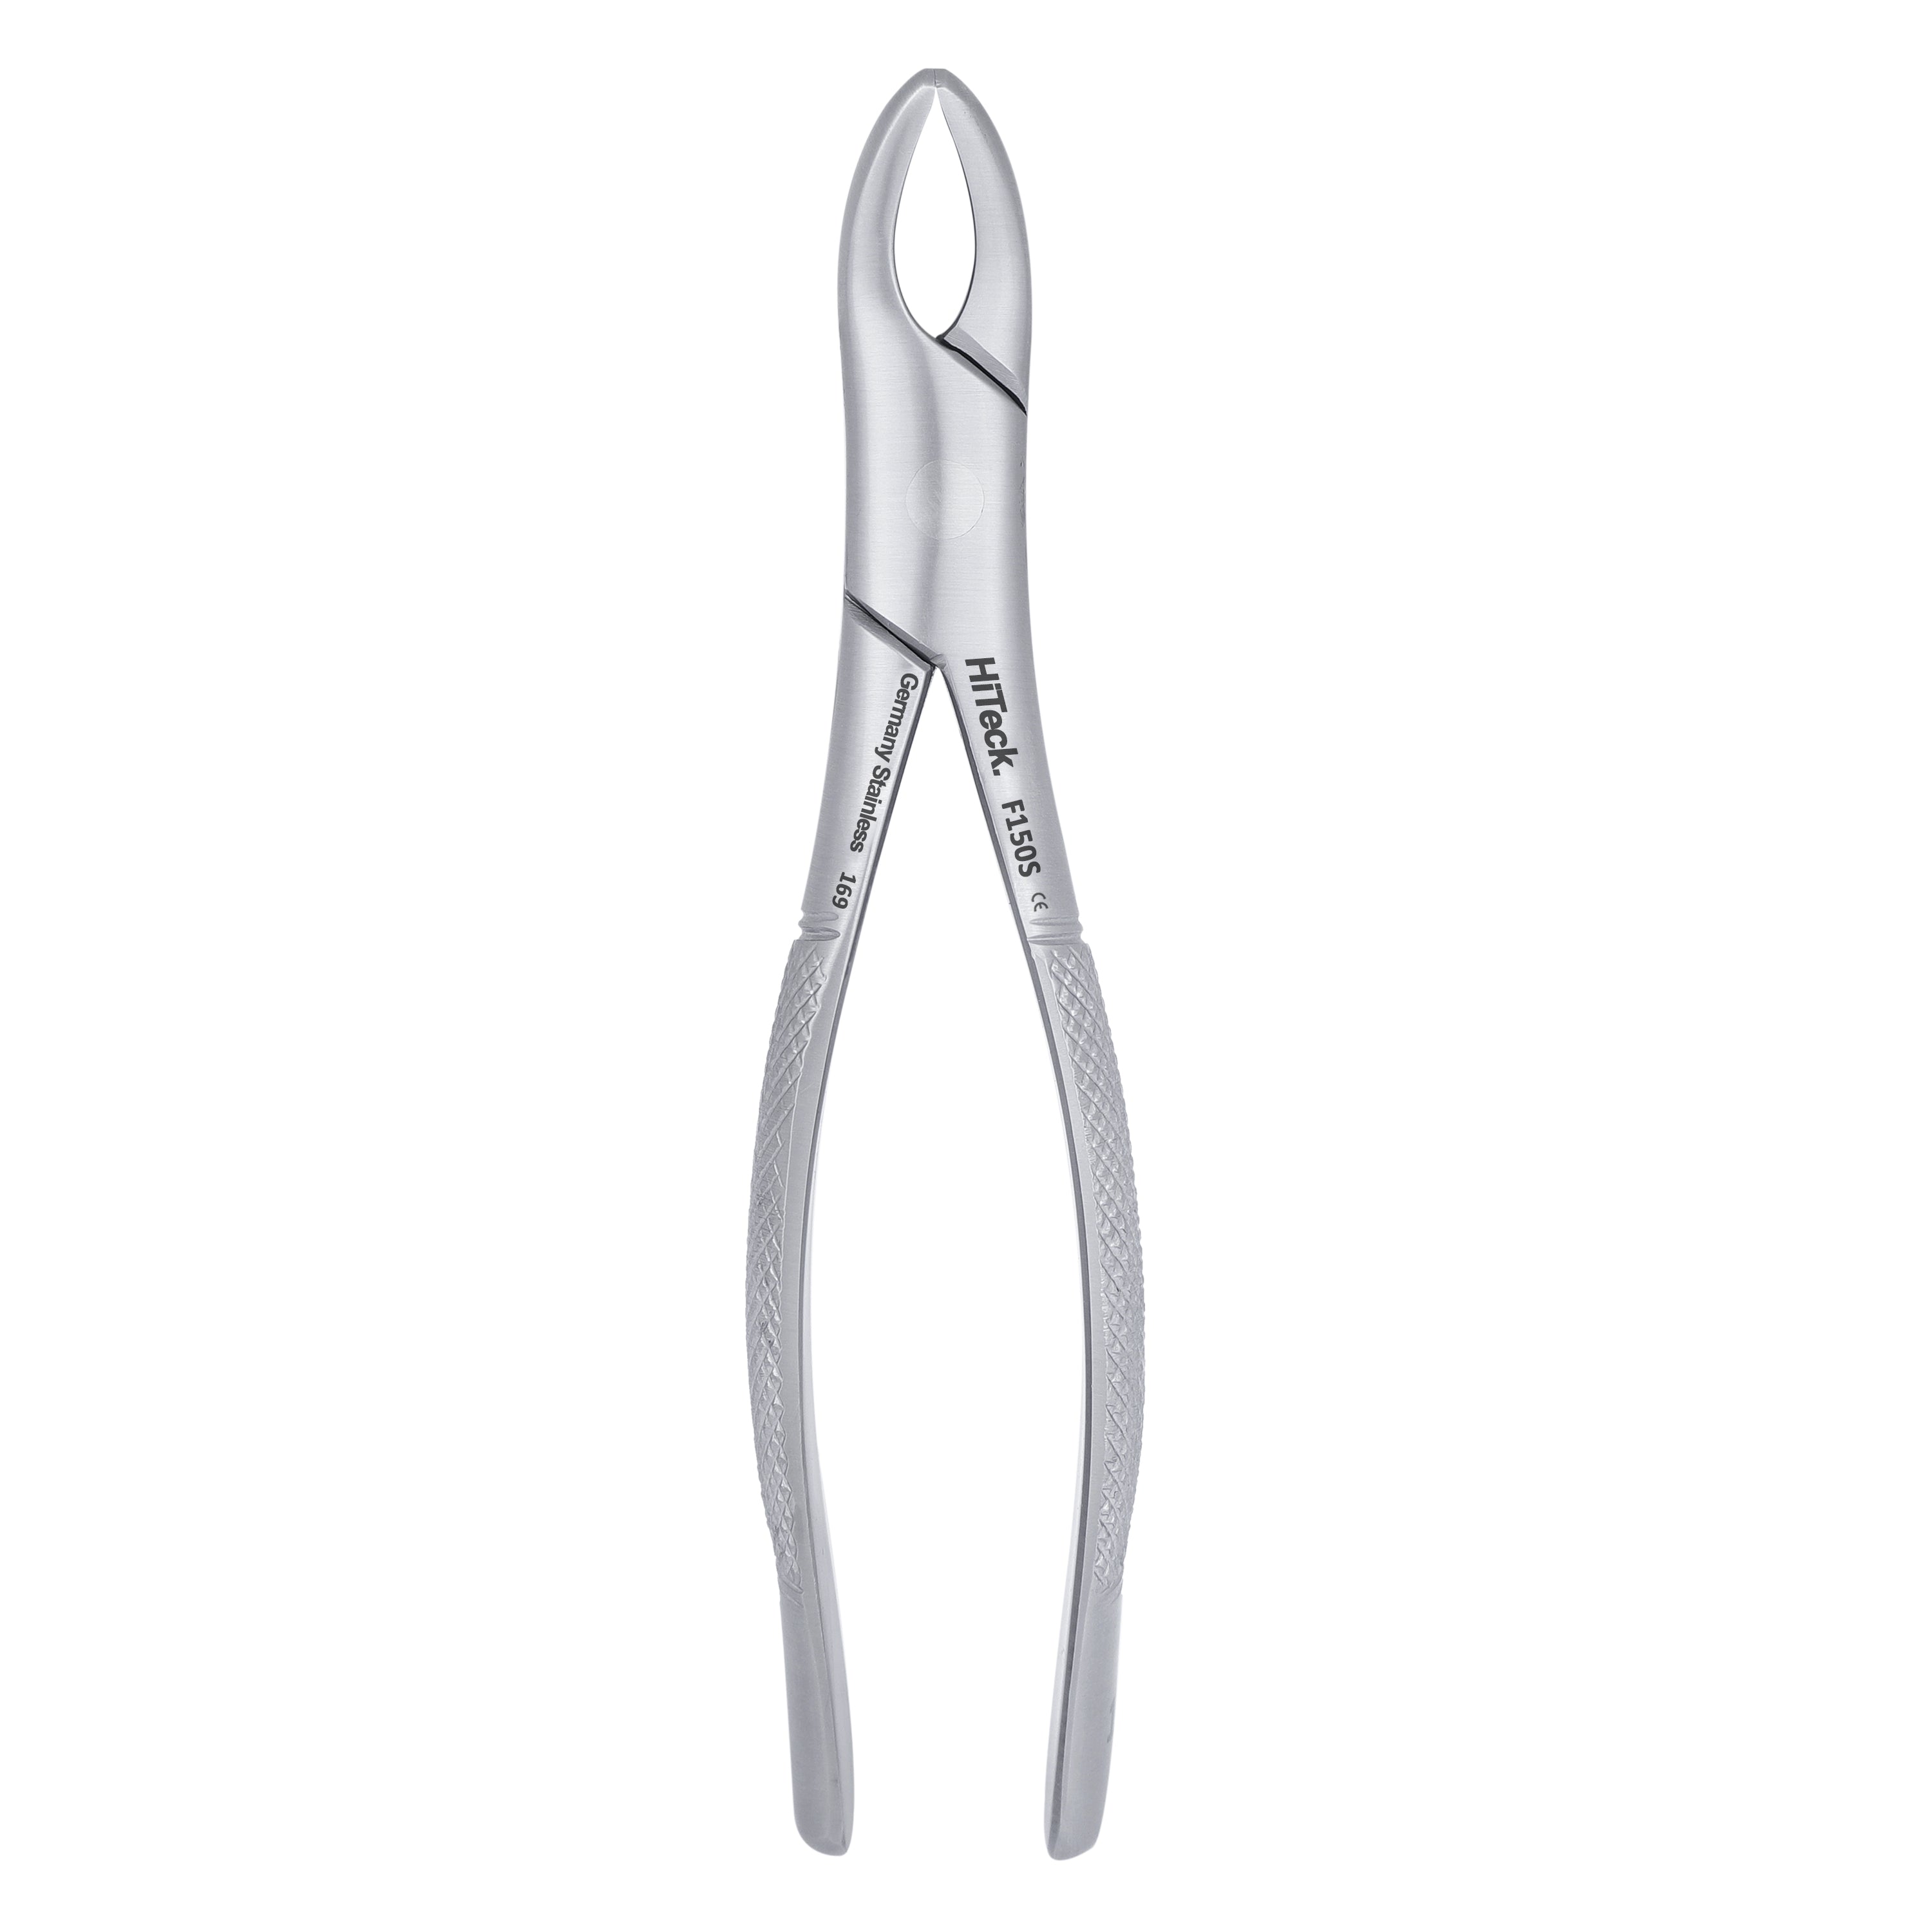 150S Pedo Upper Primary Teeth & Roots Universal Extraction Forcep - HiTeck Medical Instruments